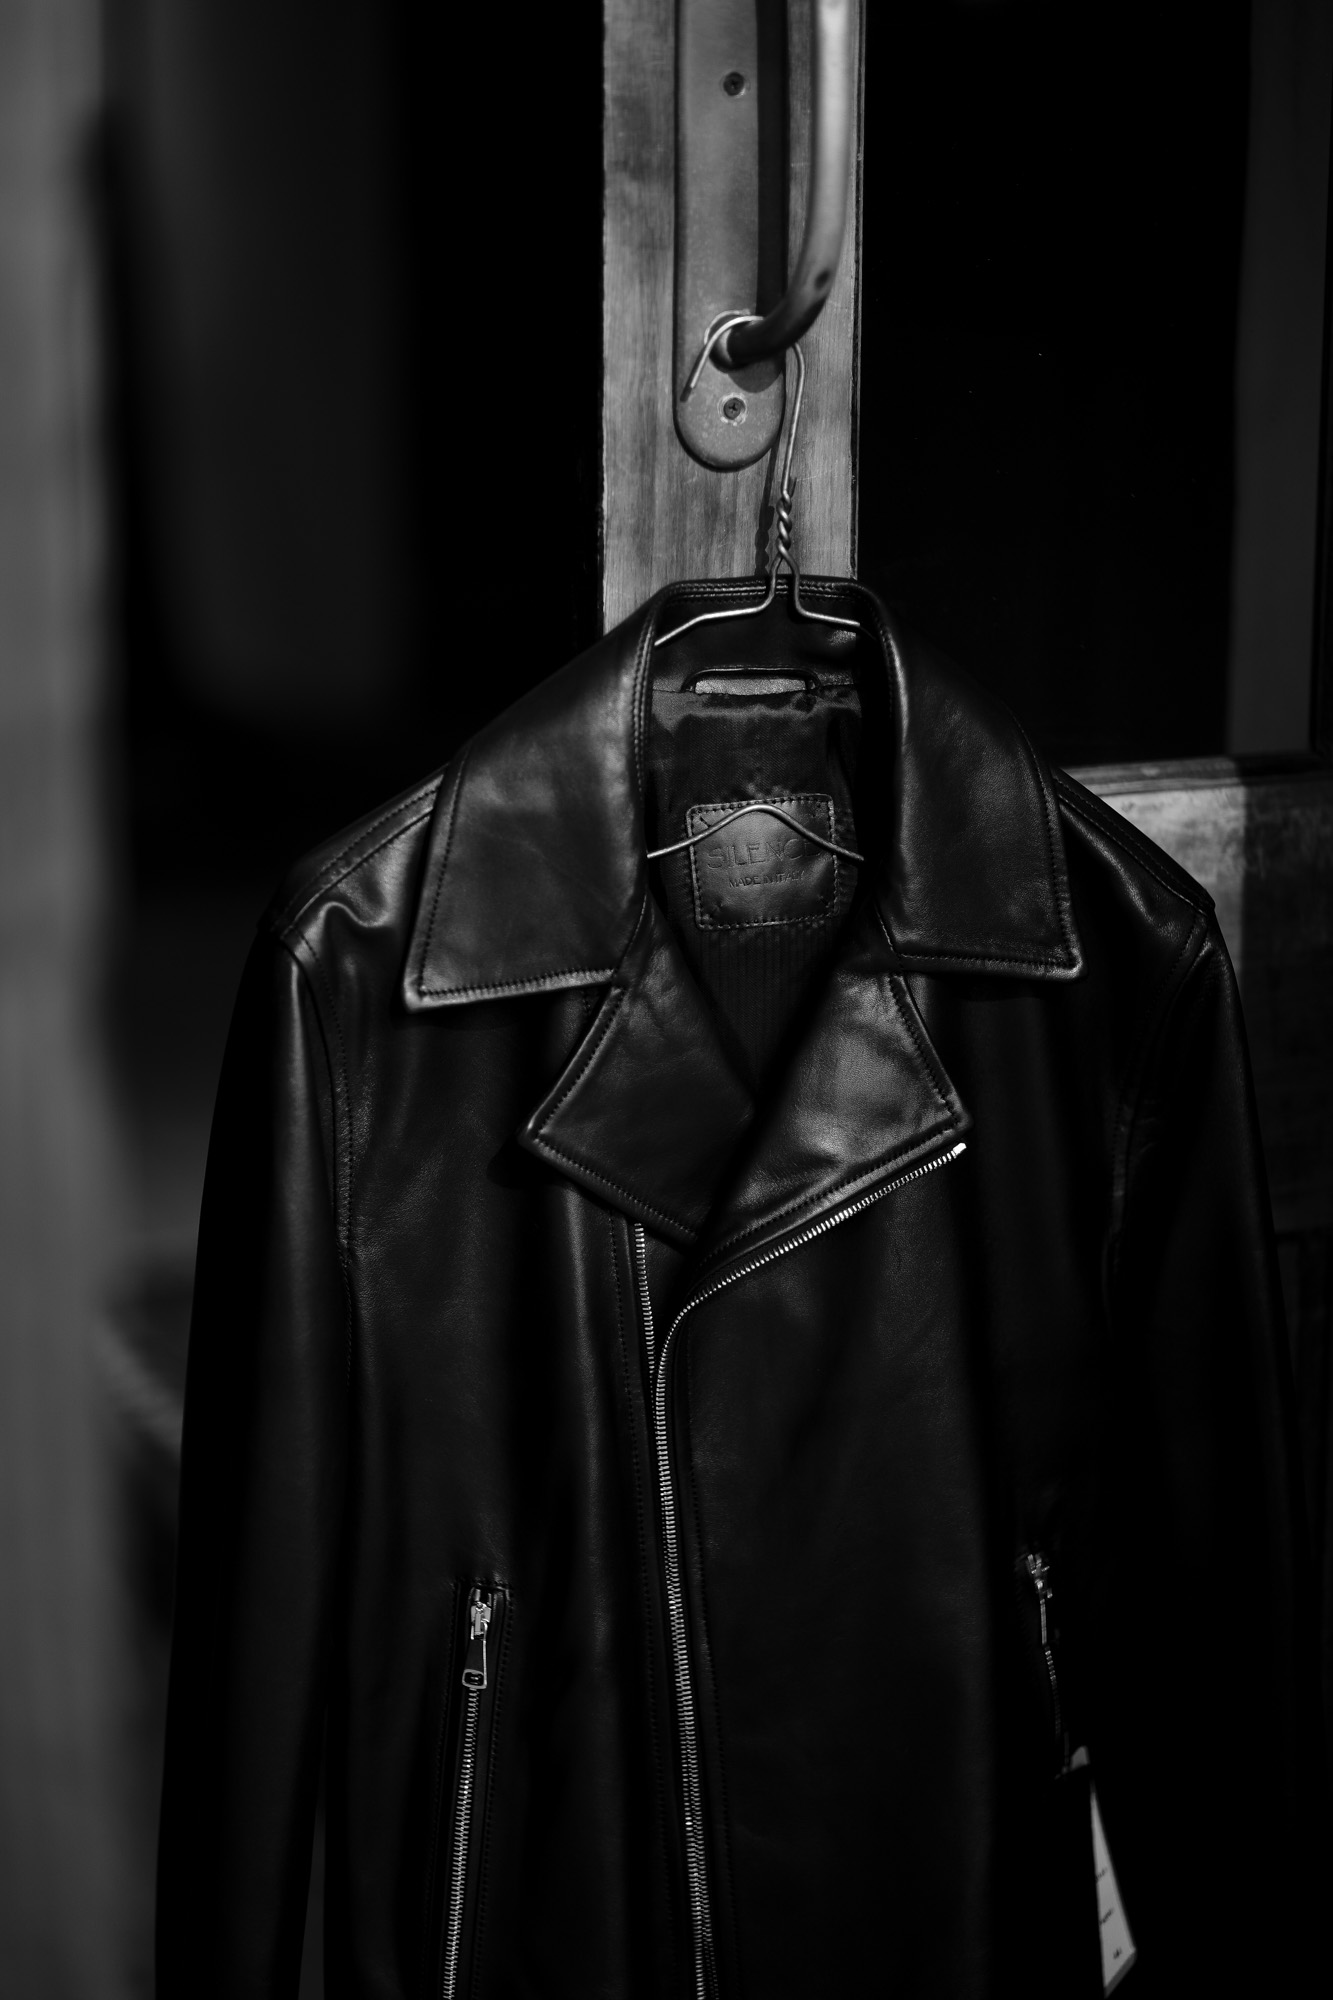 SILENCE (サイレンス) Double Riders Jacket (ダブル ライダース ジャケット) Goatskin Leather (ゴートスキンレザー) GOLD ZIP (ゴールドジップ) レザー ライダース ジャケット NERO GOLD ZIP (ブラックゴールドジップ) Made in italy